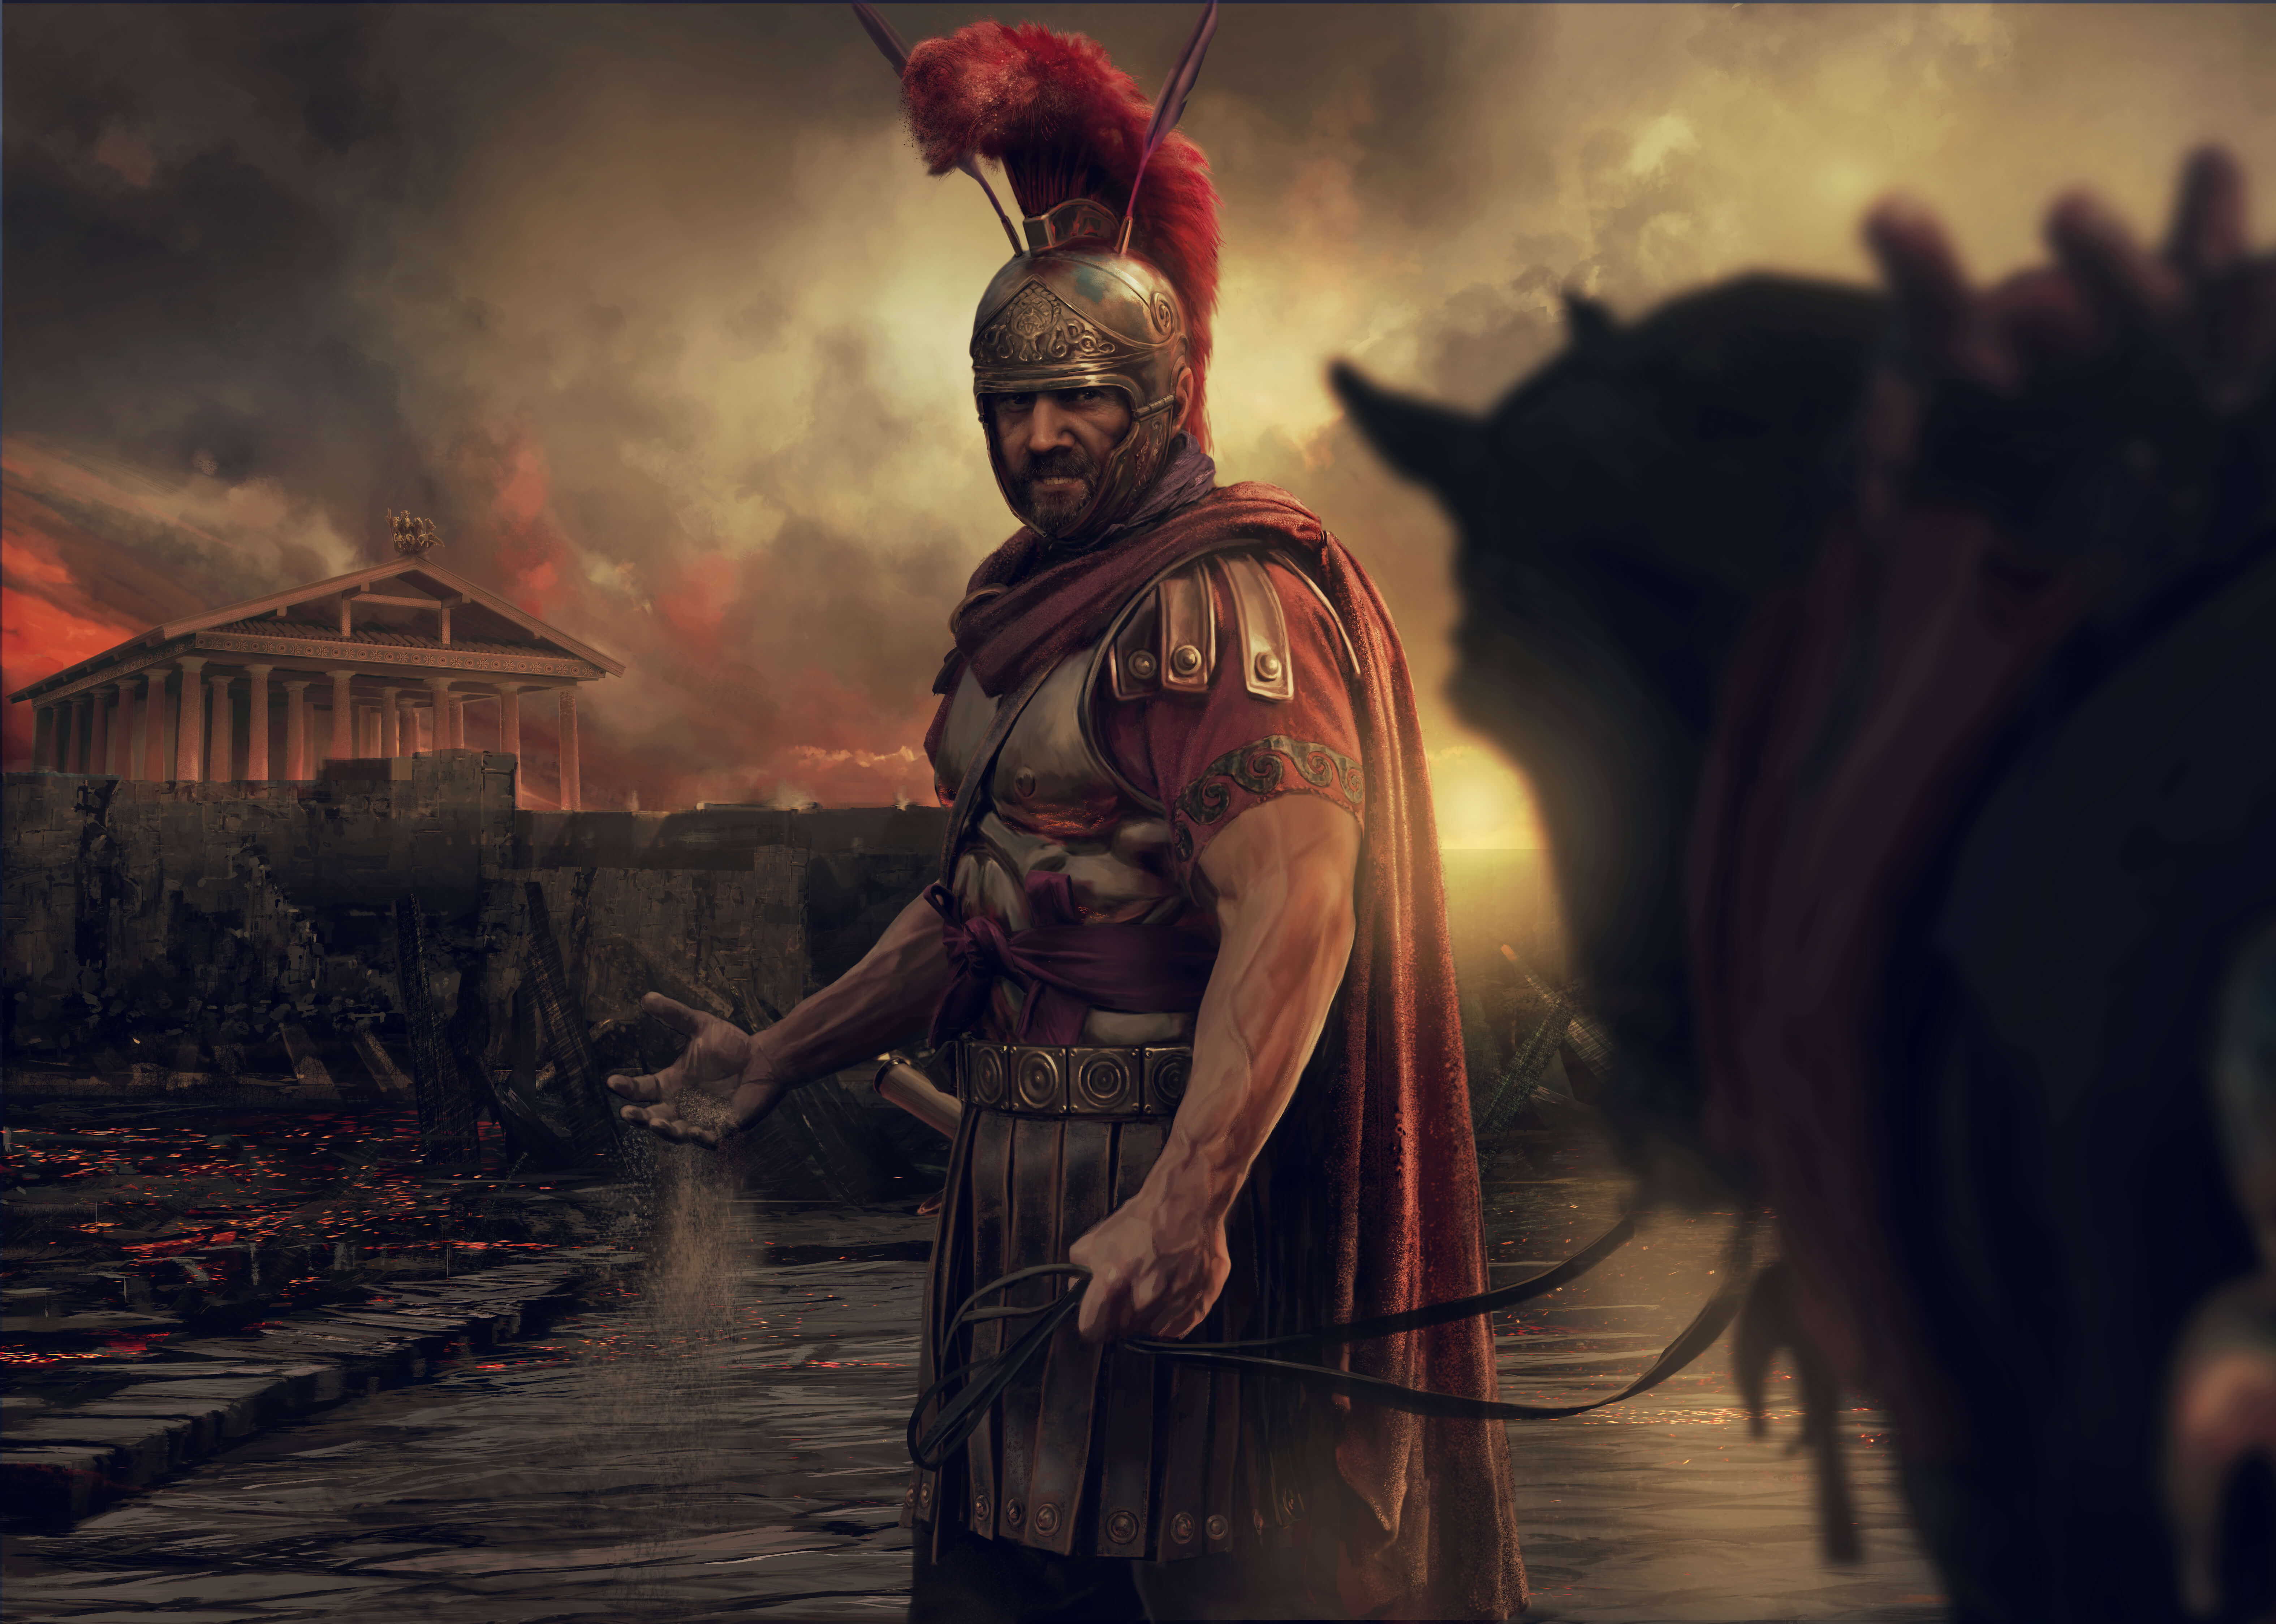 rome total war iso